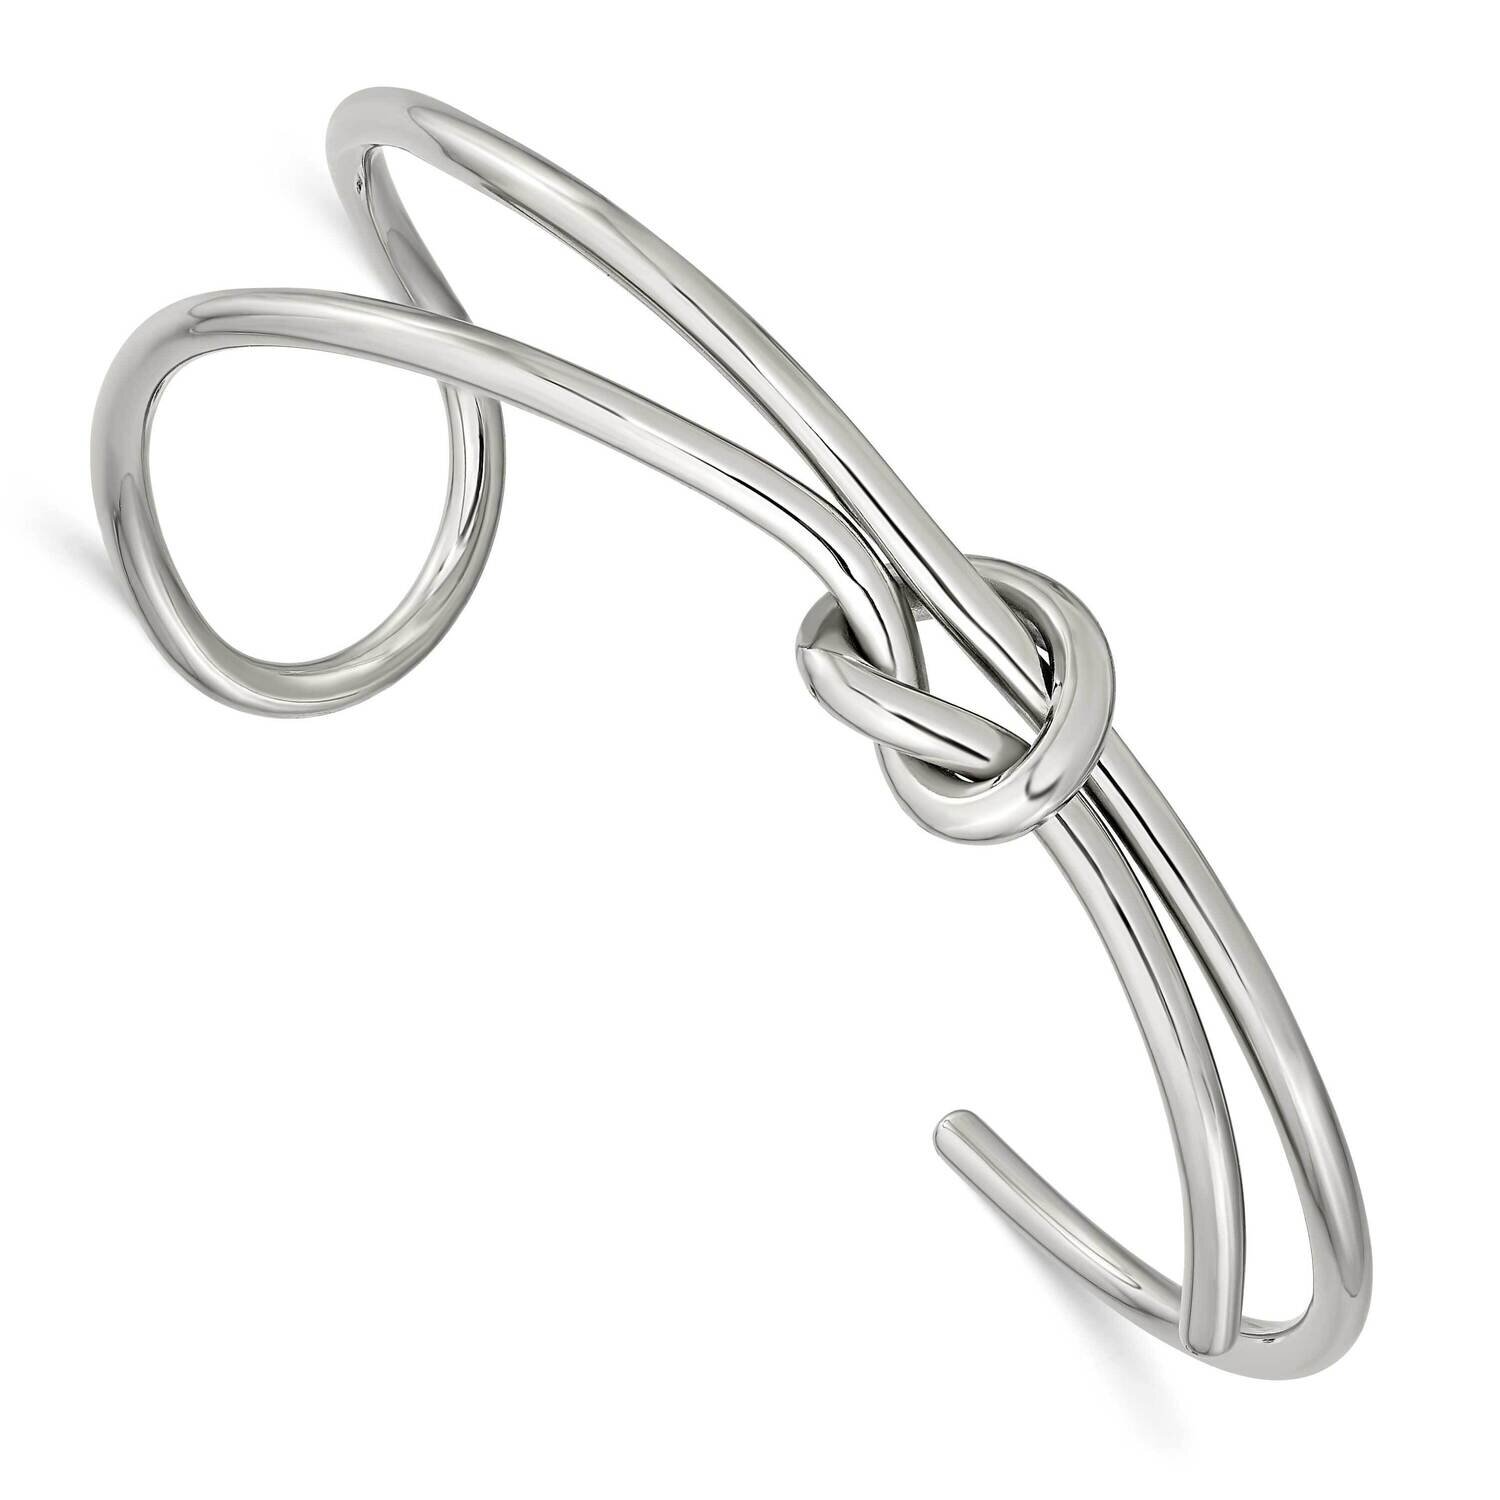 Knot Cuff Bangle Stainless Steel Polished SRB2925